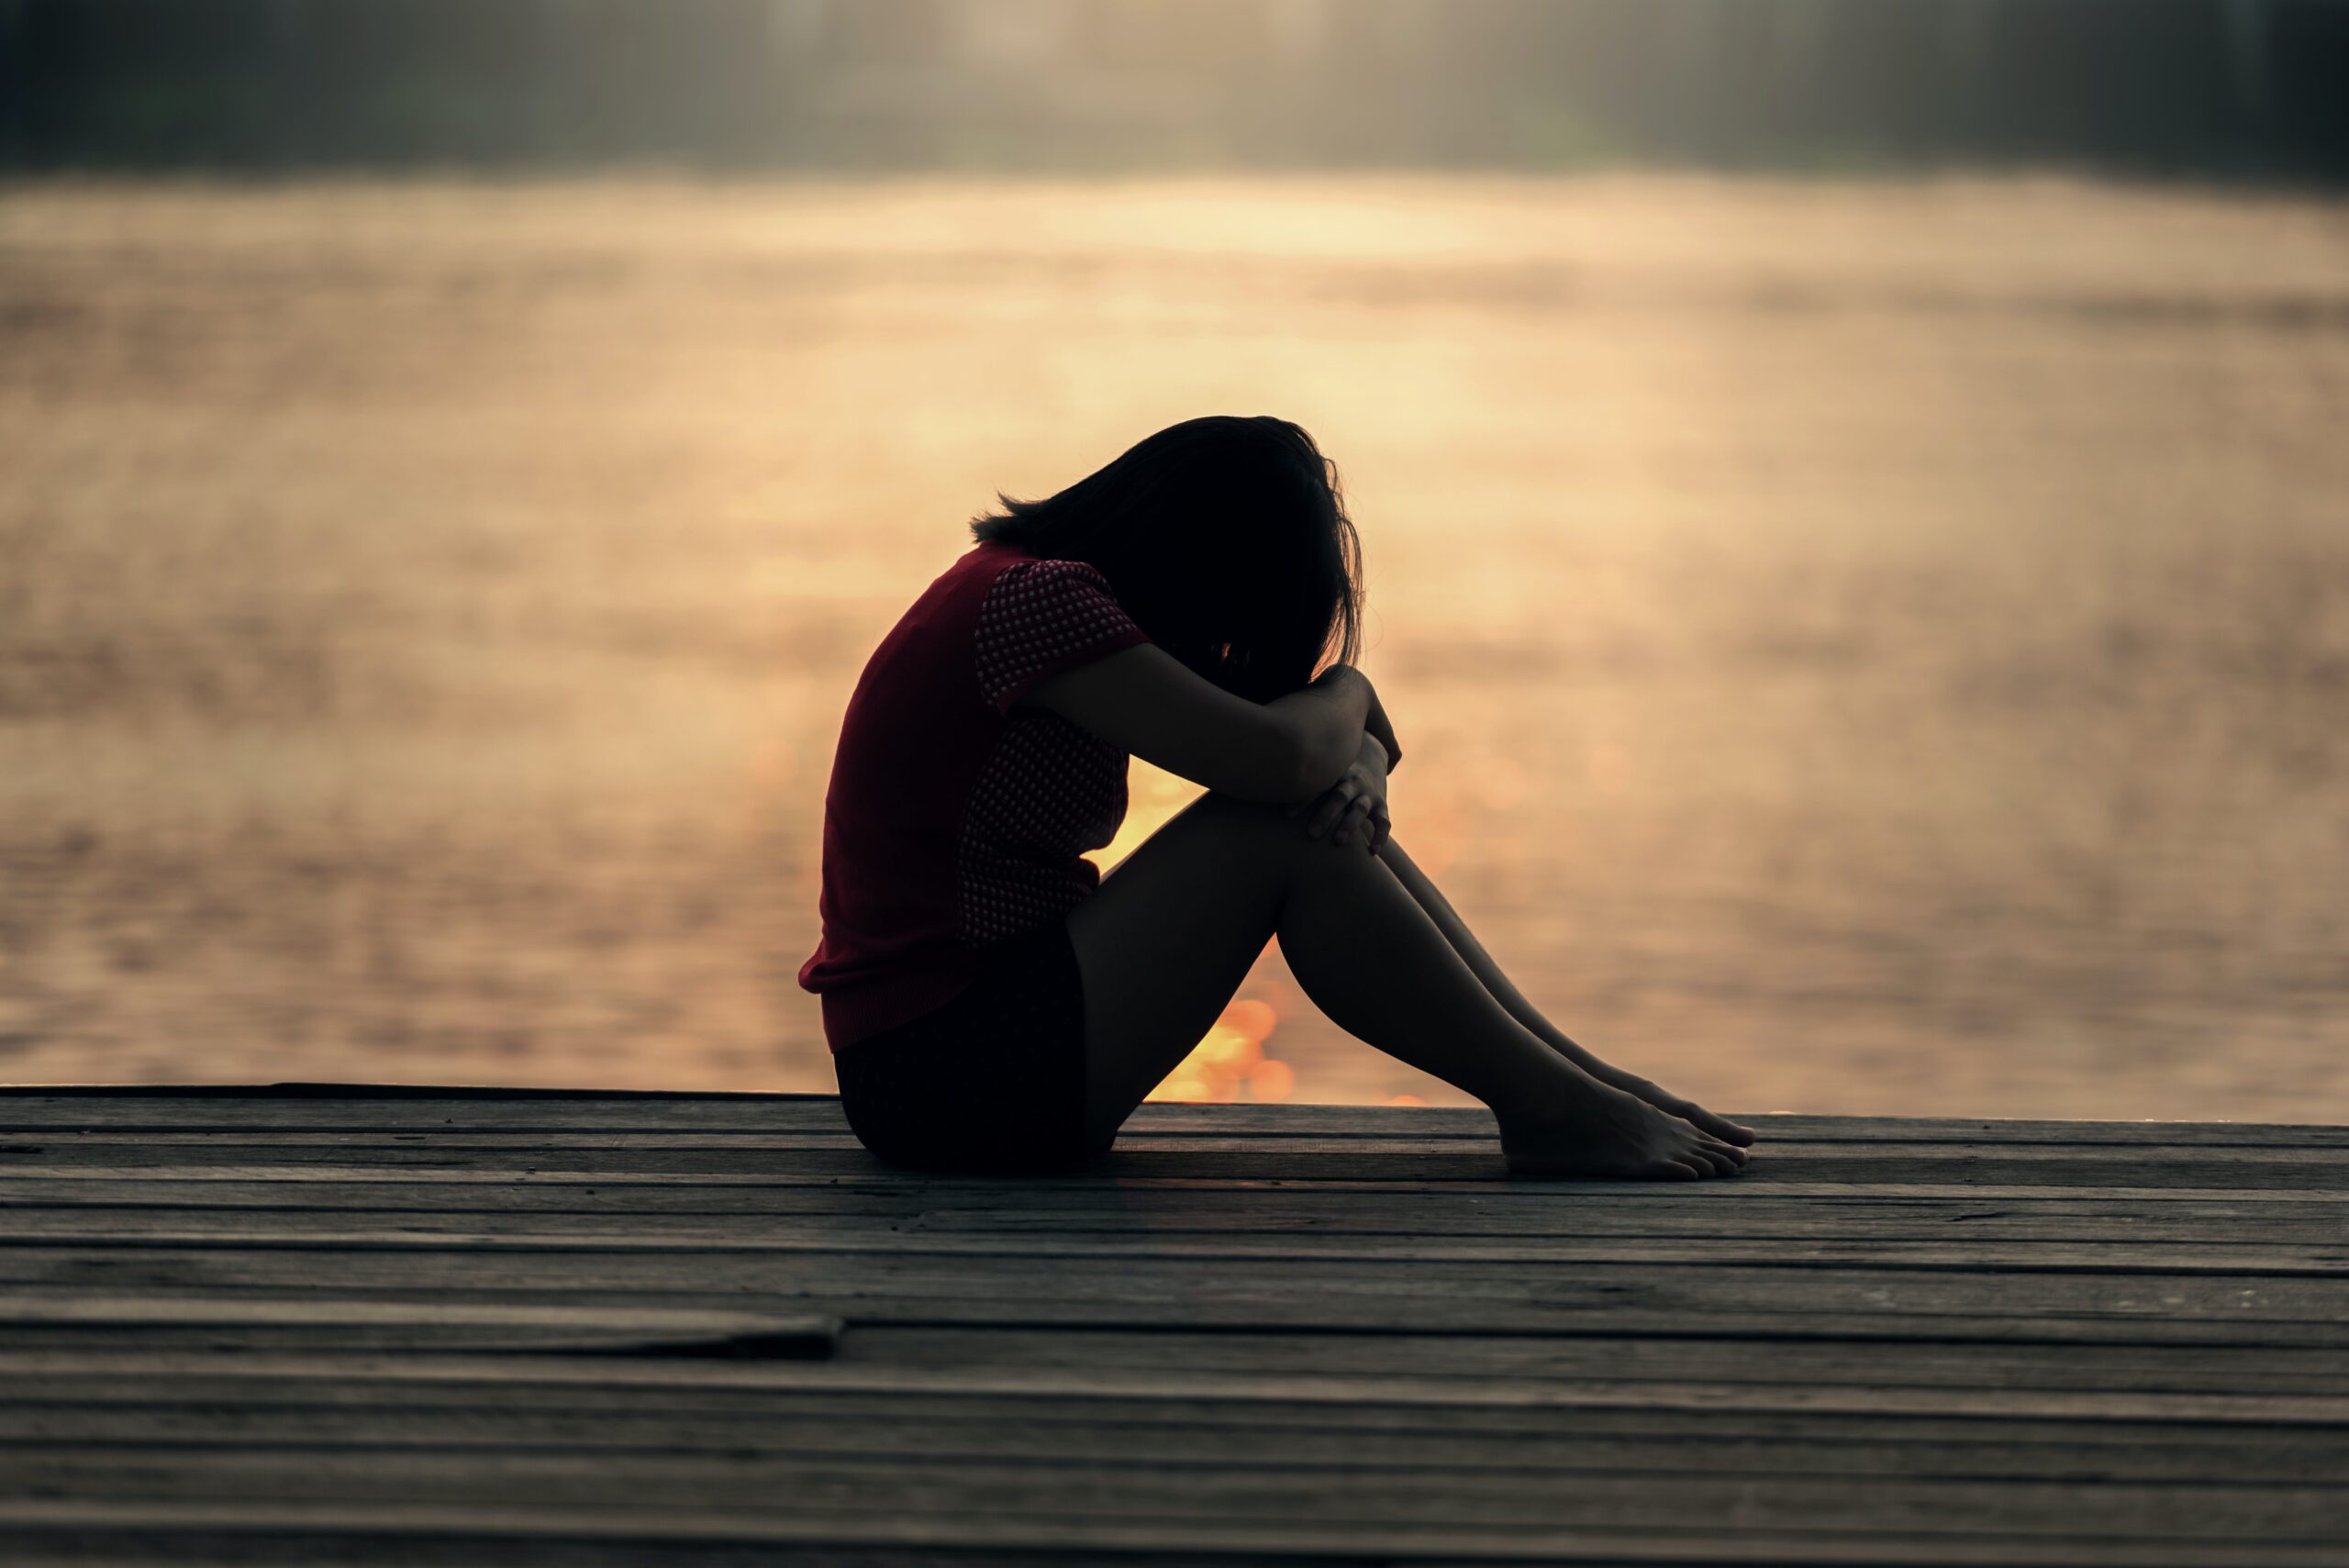 In this blog, learn 6 powerful and effective ways to treat Depression through homeopathy